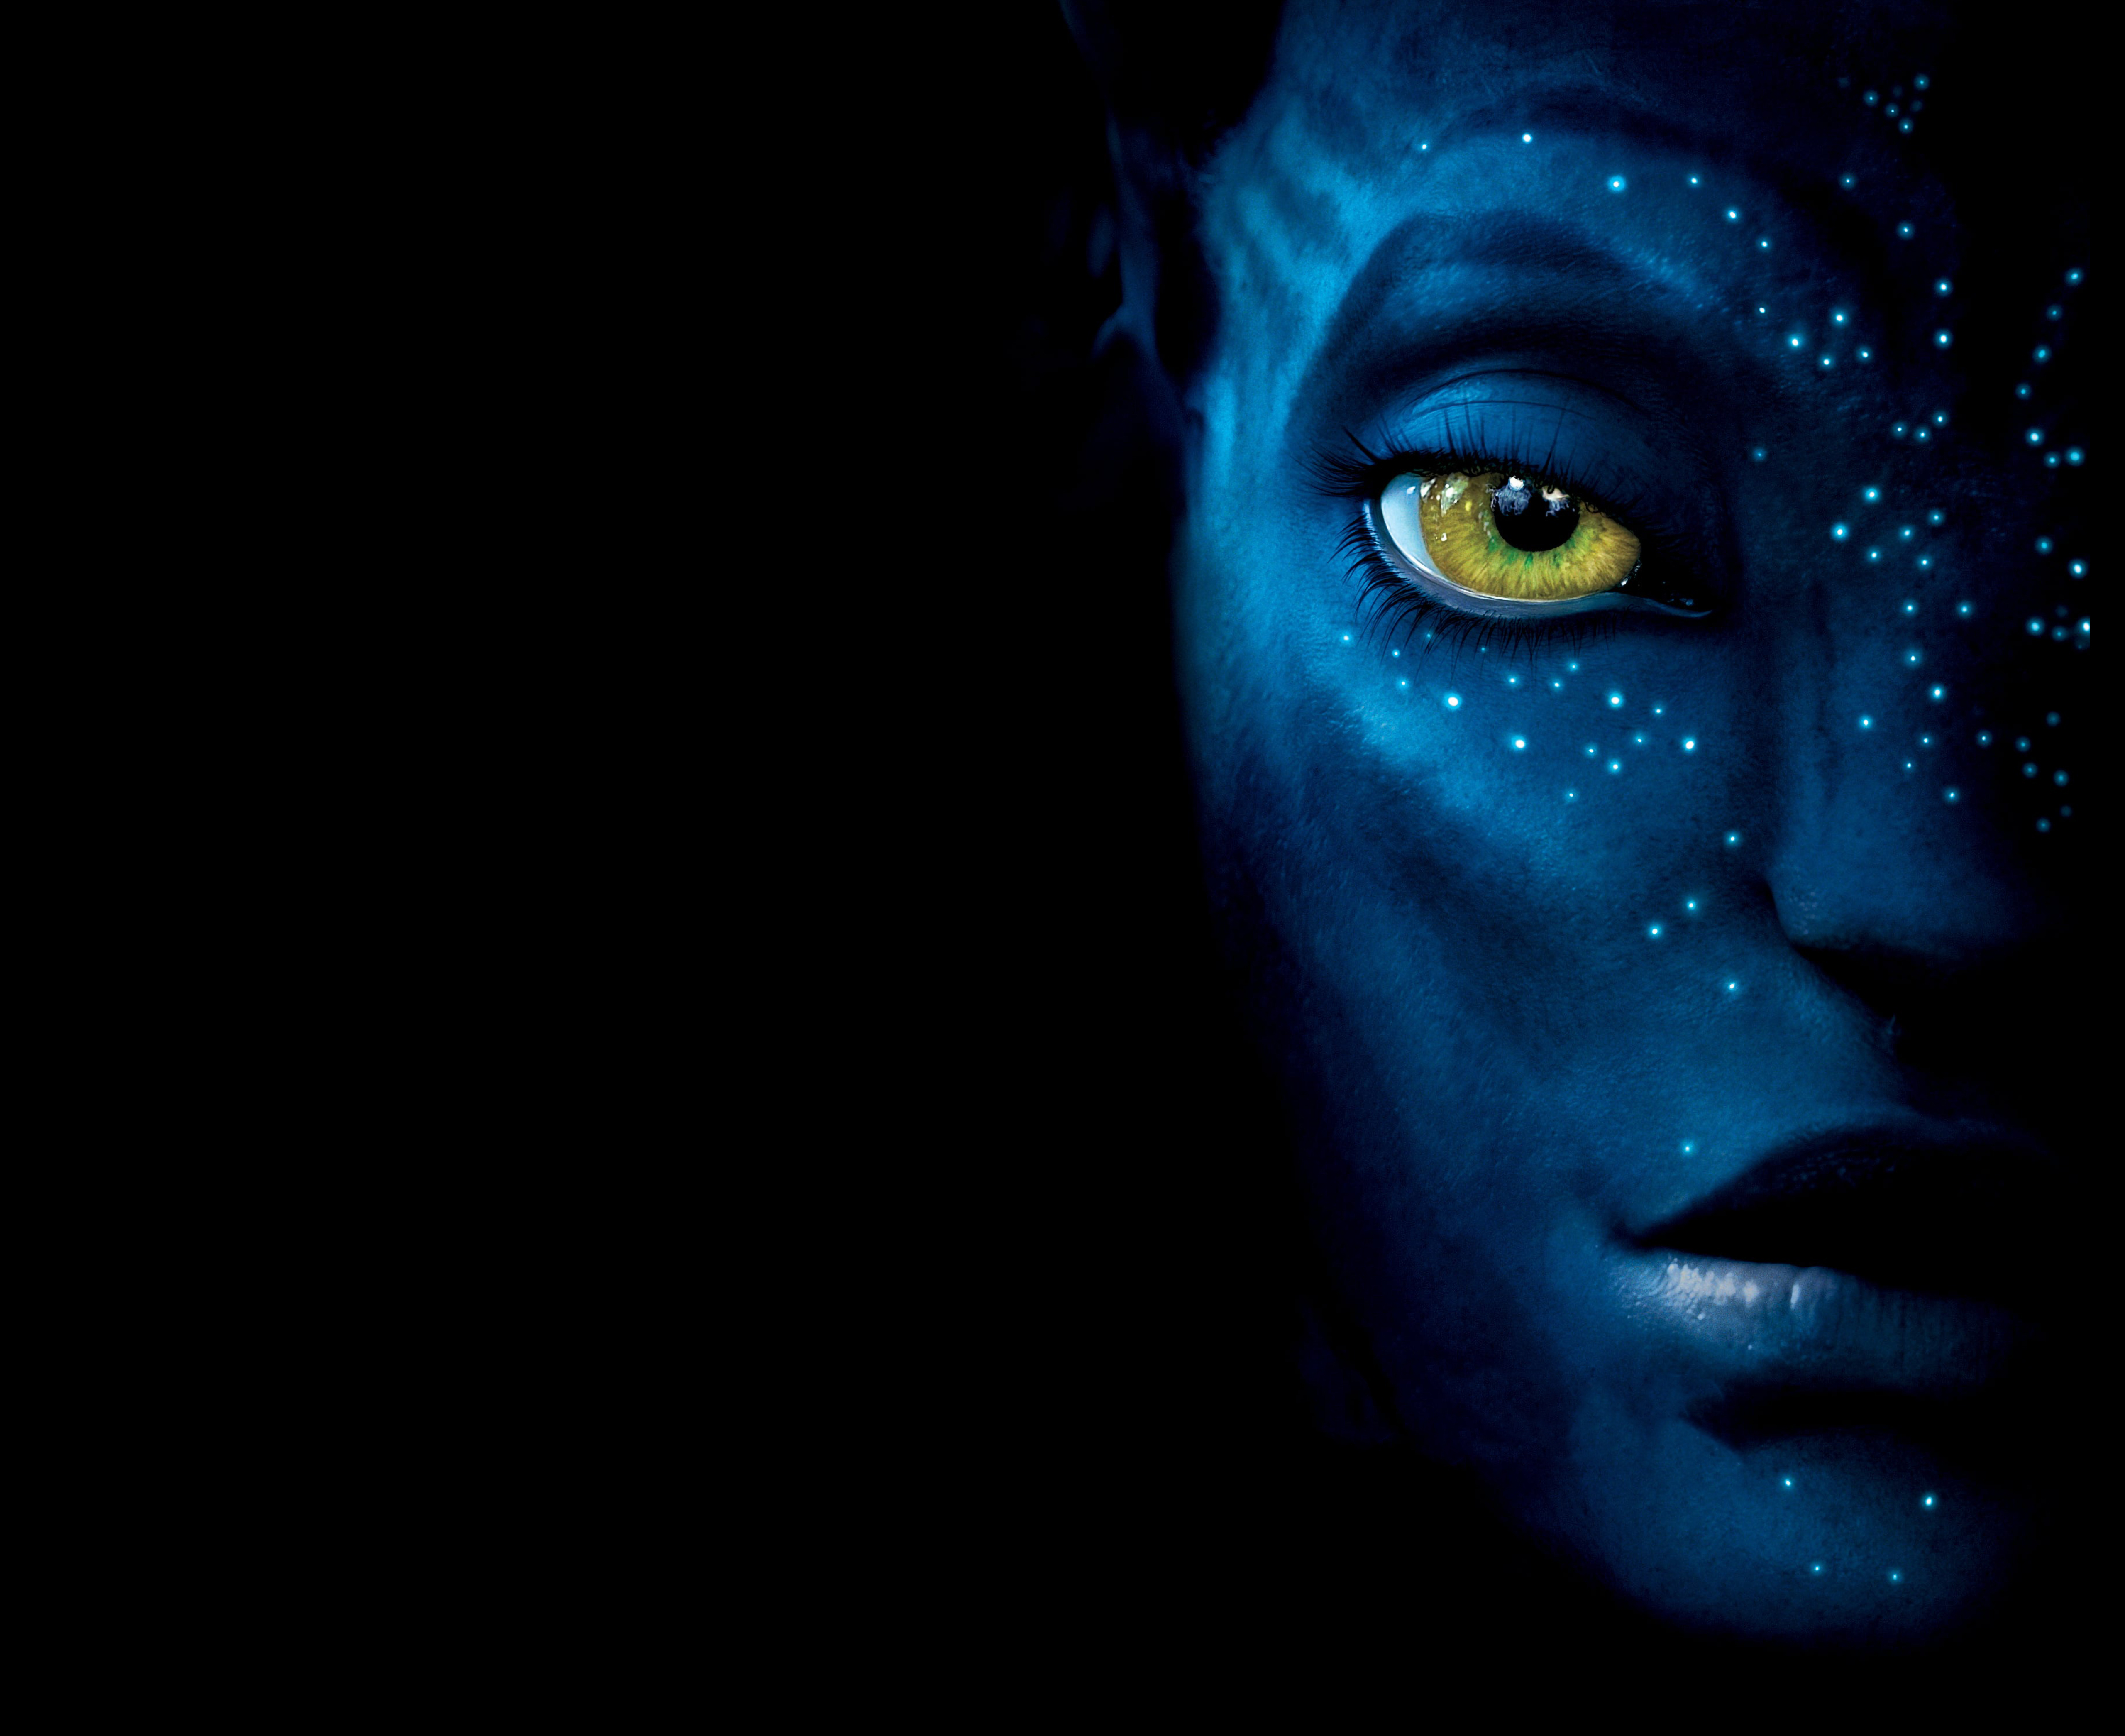 Avatar Wallpaper Hd Movies 4k Wallpapers Images Photos And Background